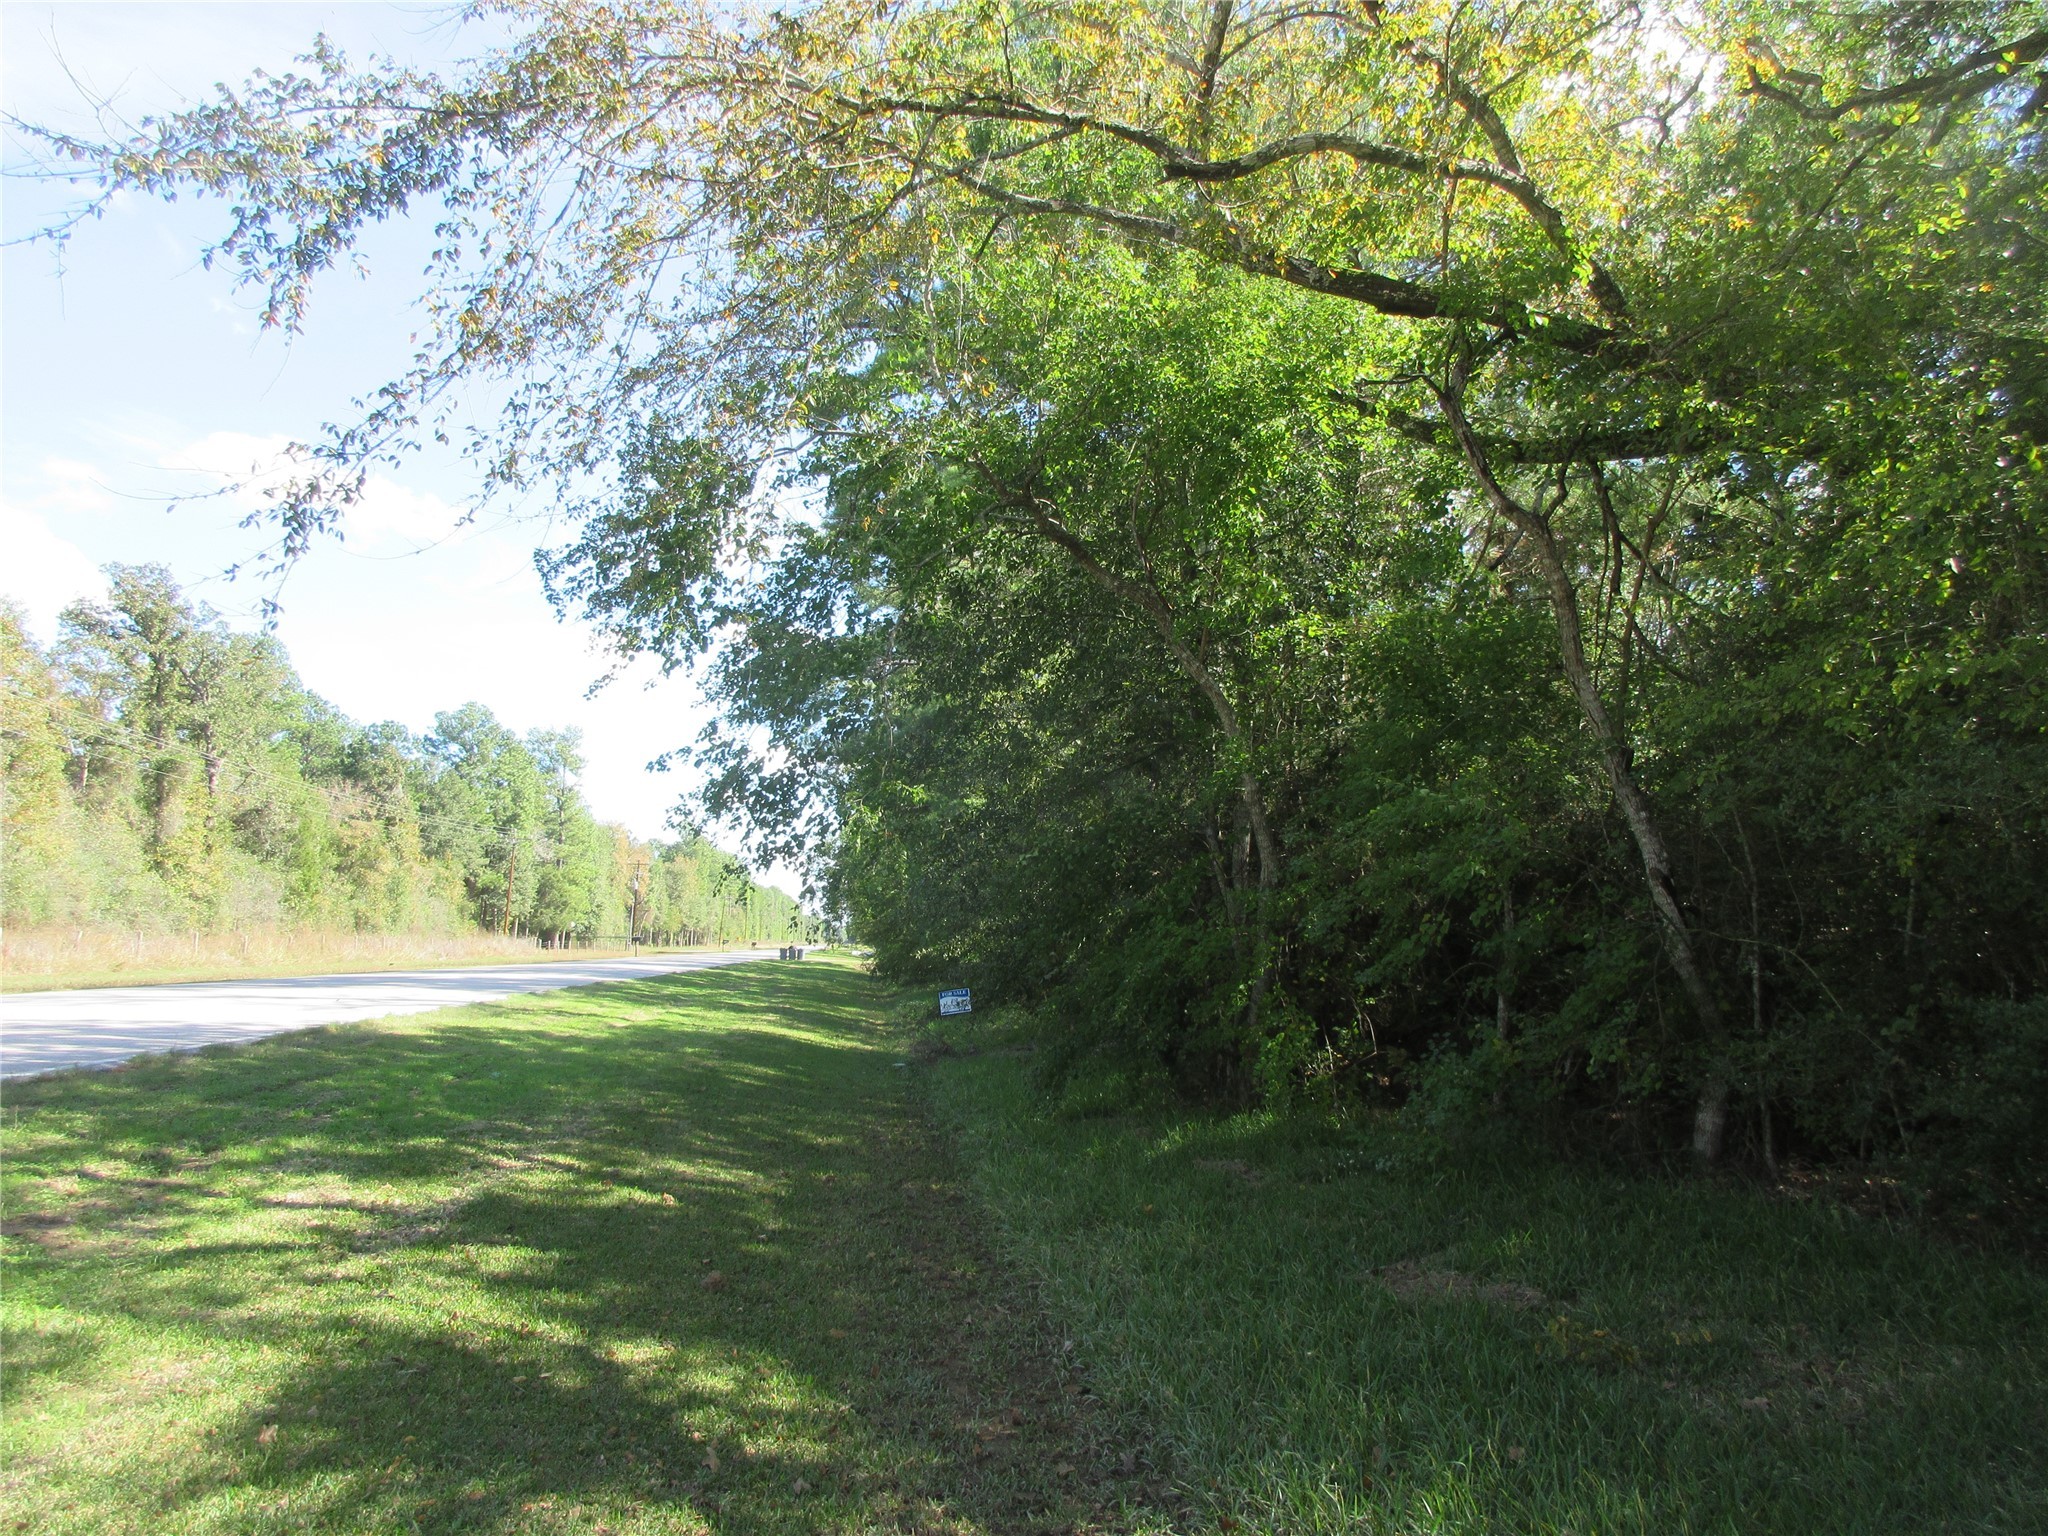 View down the road of the property line